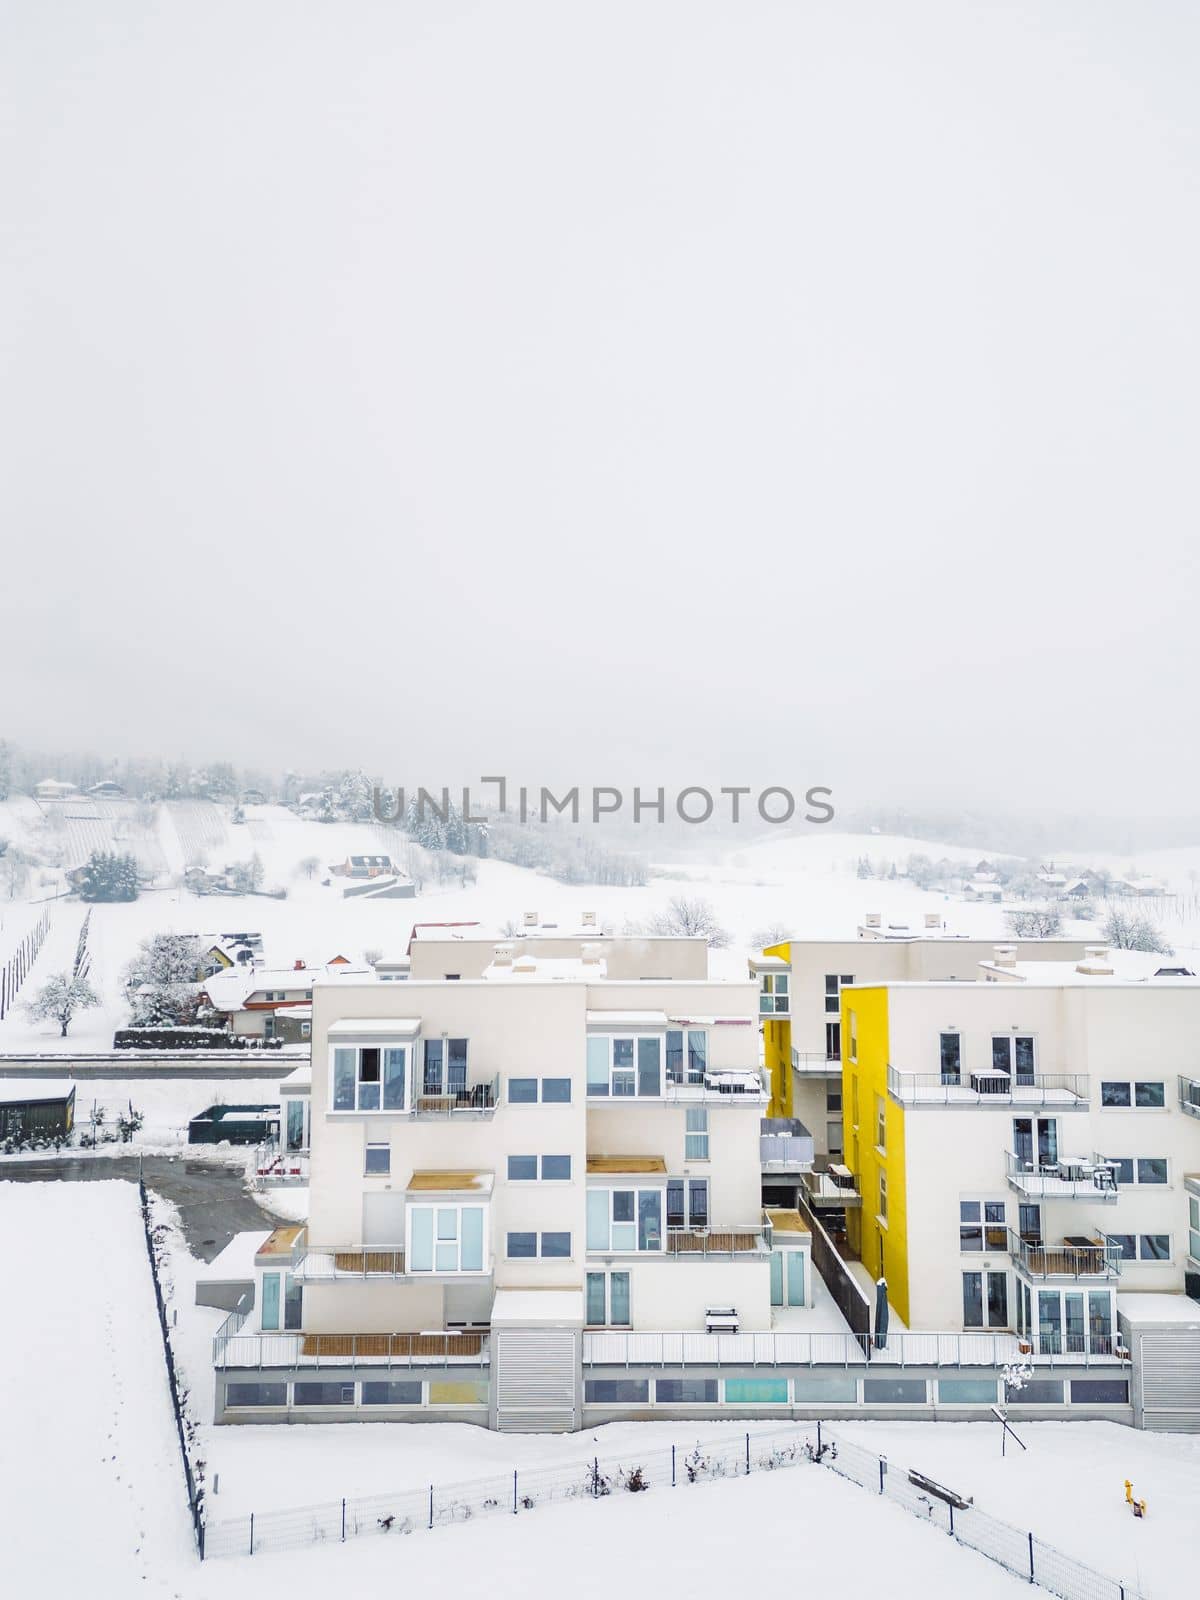 Newly build residential complex with apartments on a snowy winter day by VisualProductions